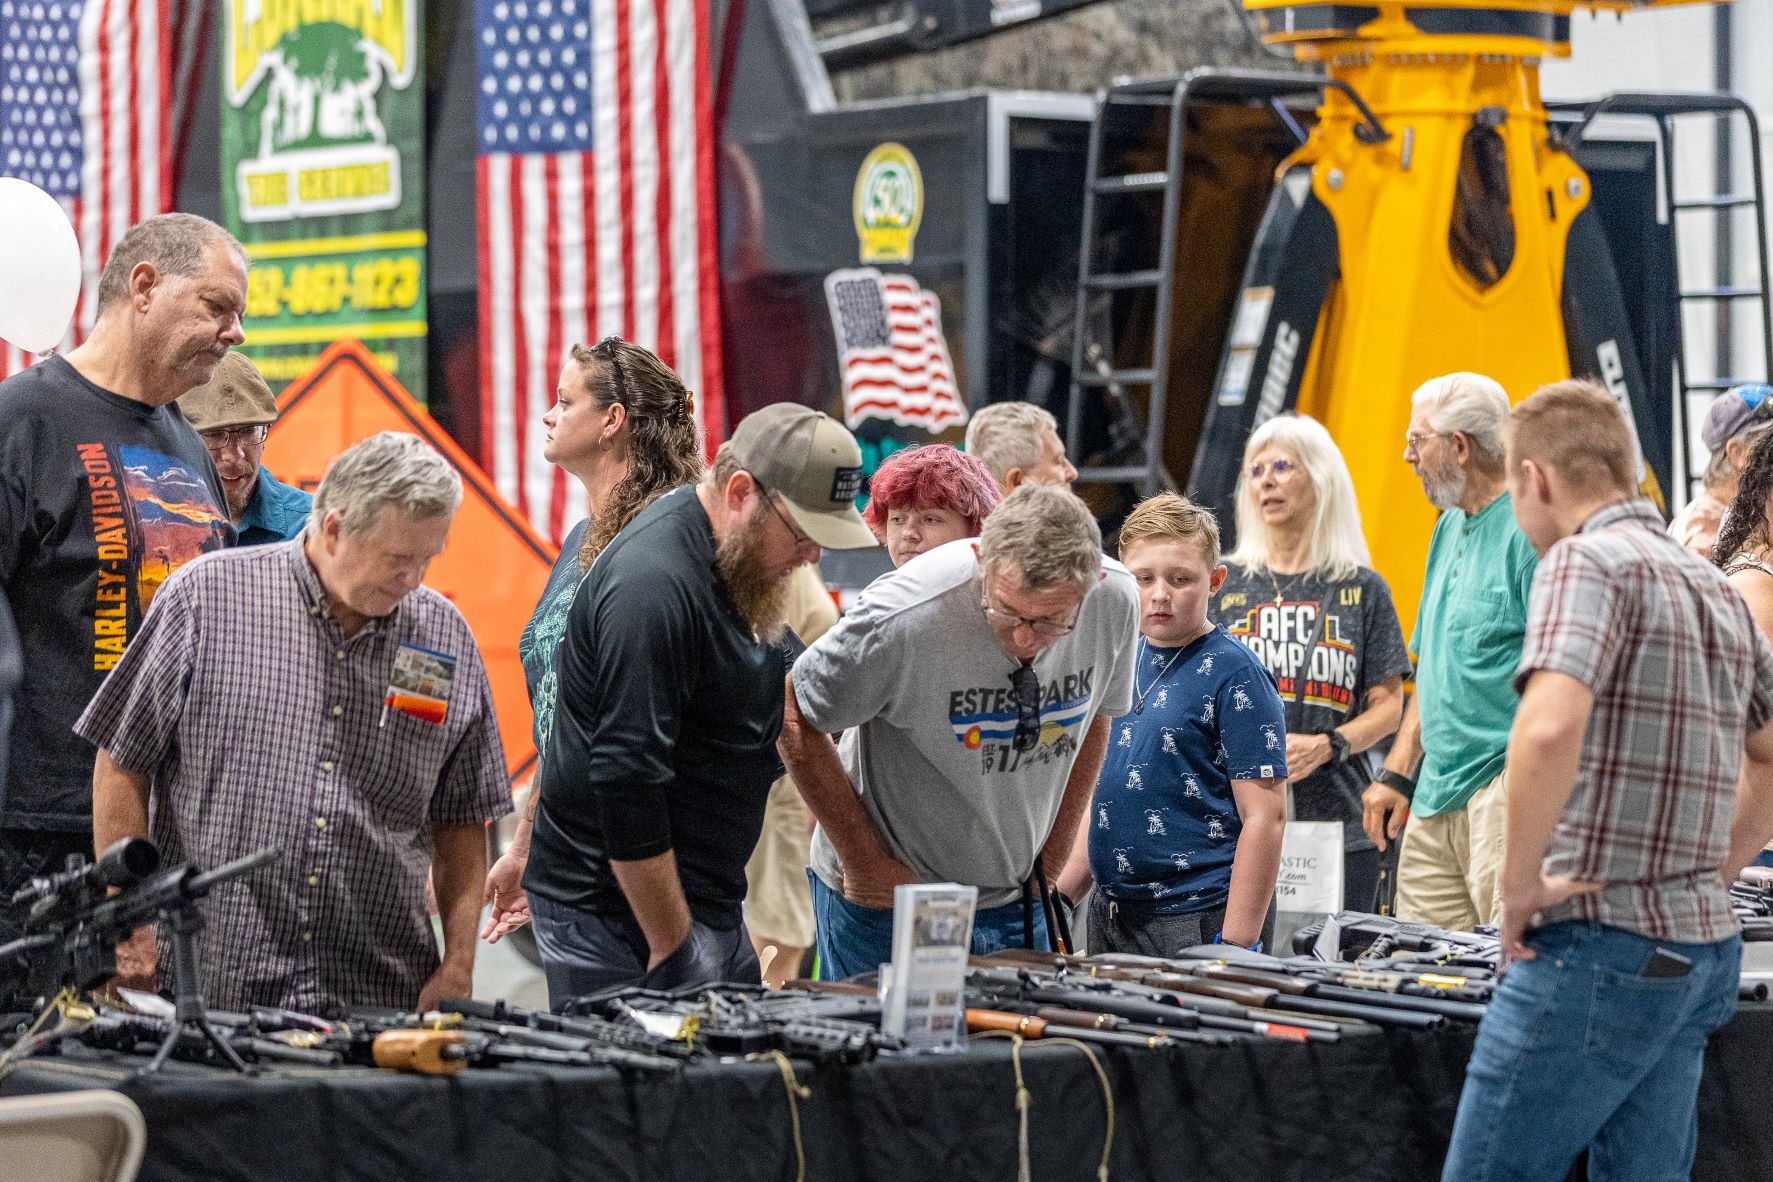 Several men browse a table filled with a variety of firearms and weaponry for hunters. American flags and large environmental equipment are in the background